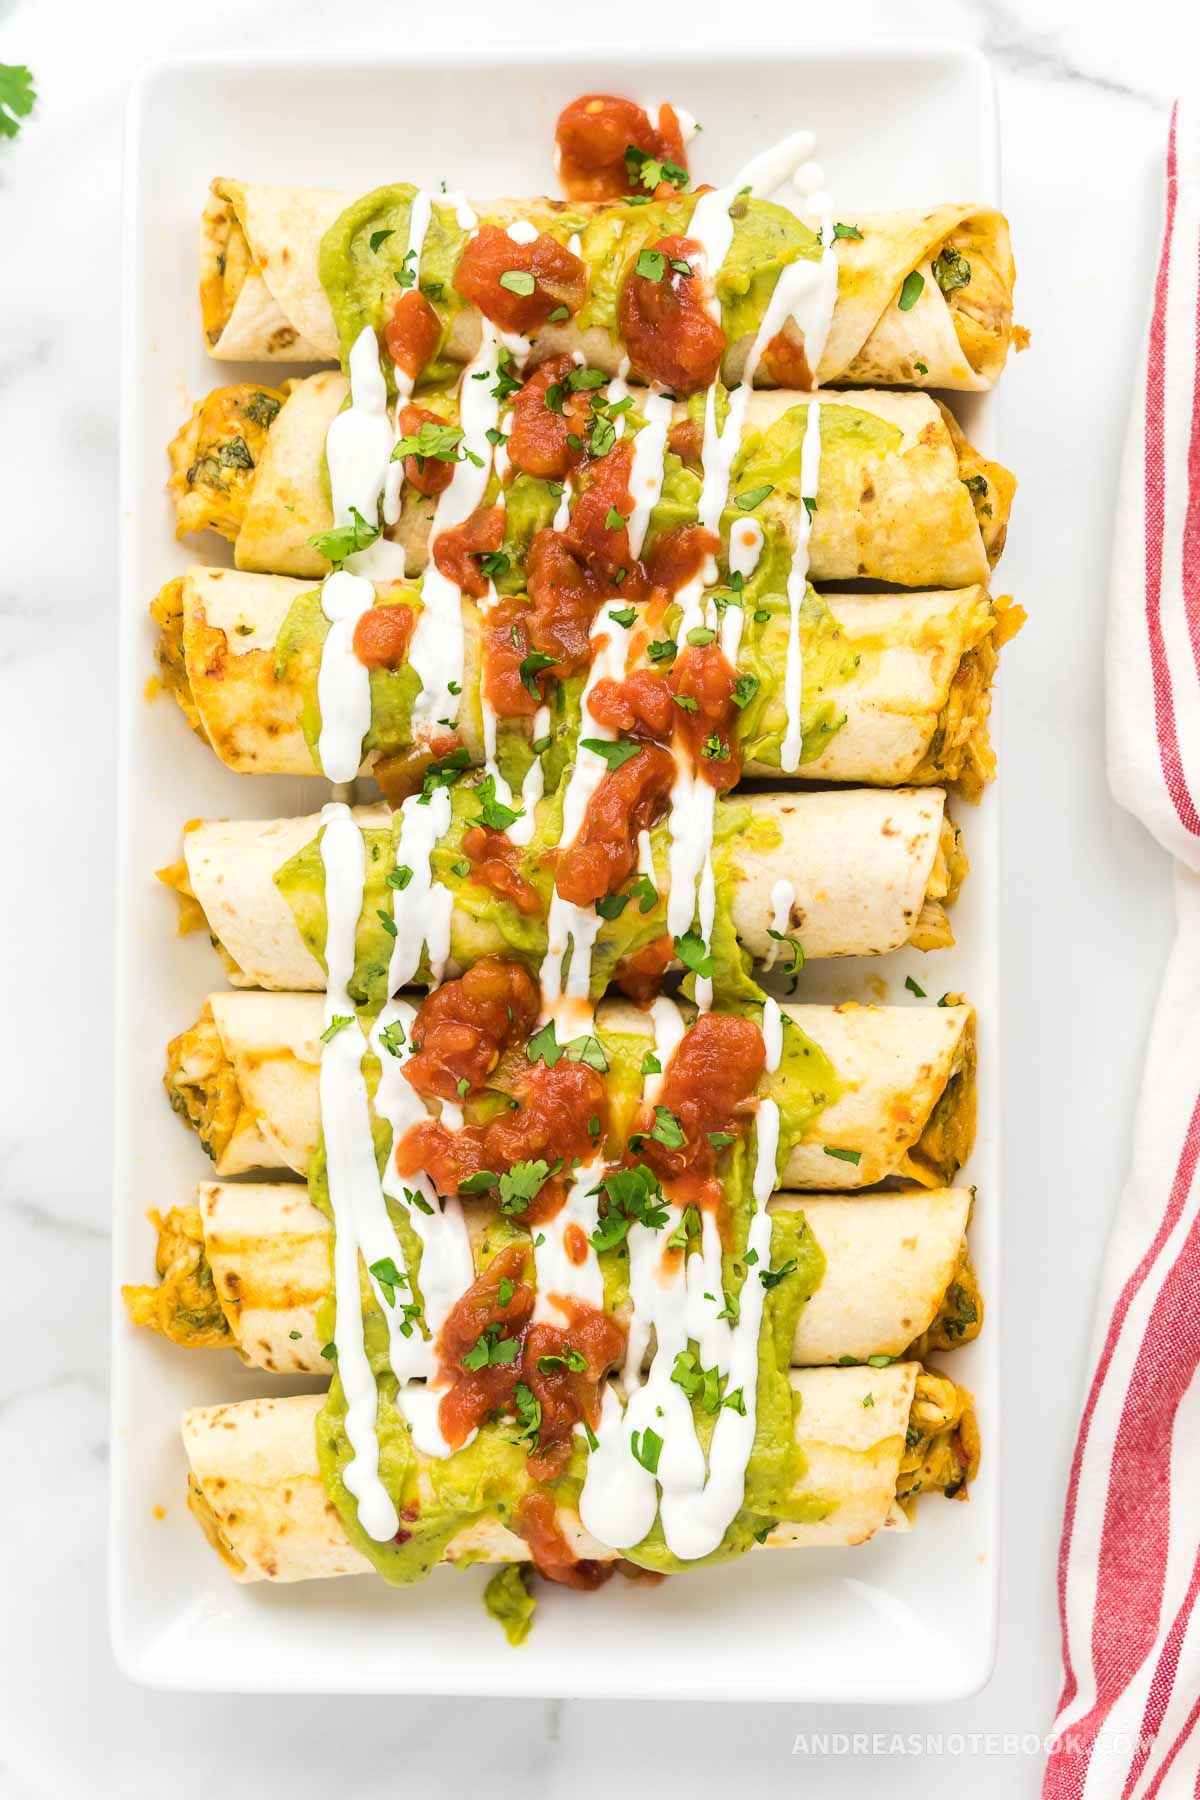 Platter with 7 cooked chicken taquitos in a row covered in salsa, guacamole and sour cream.